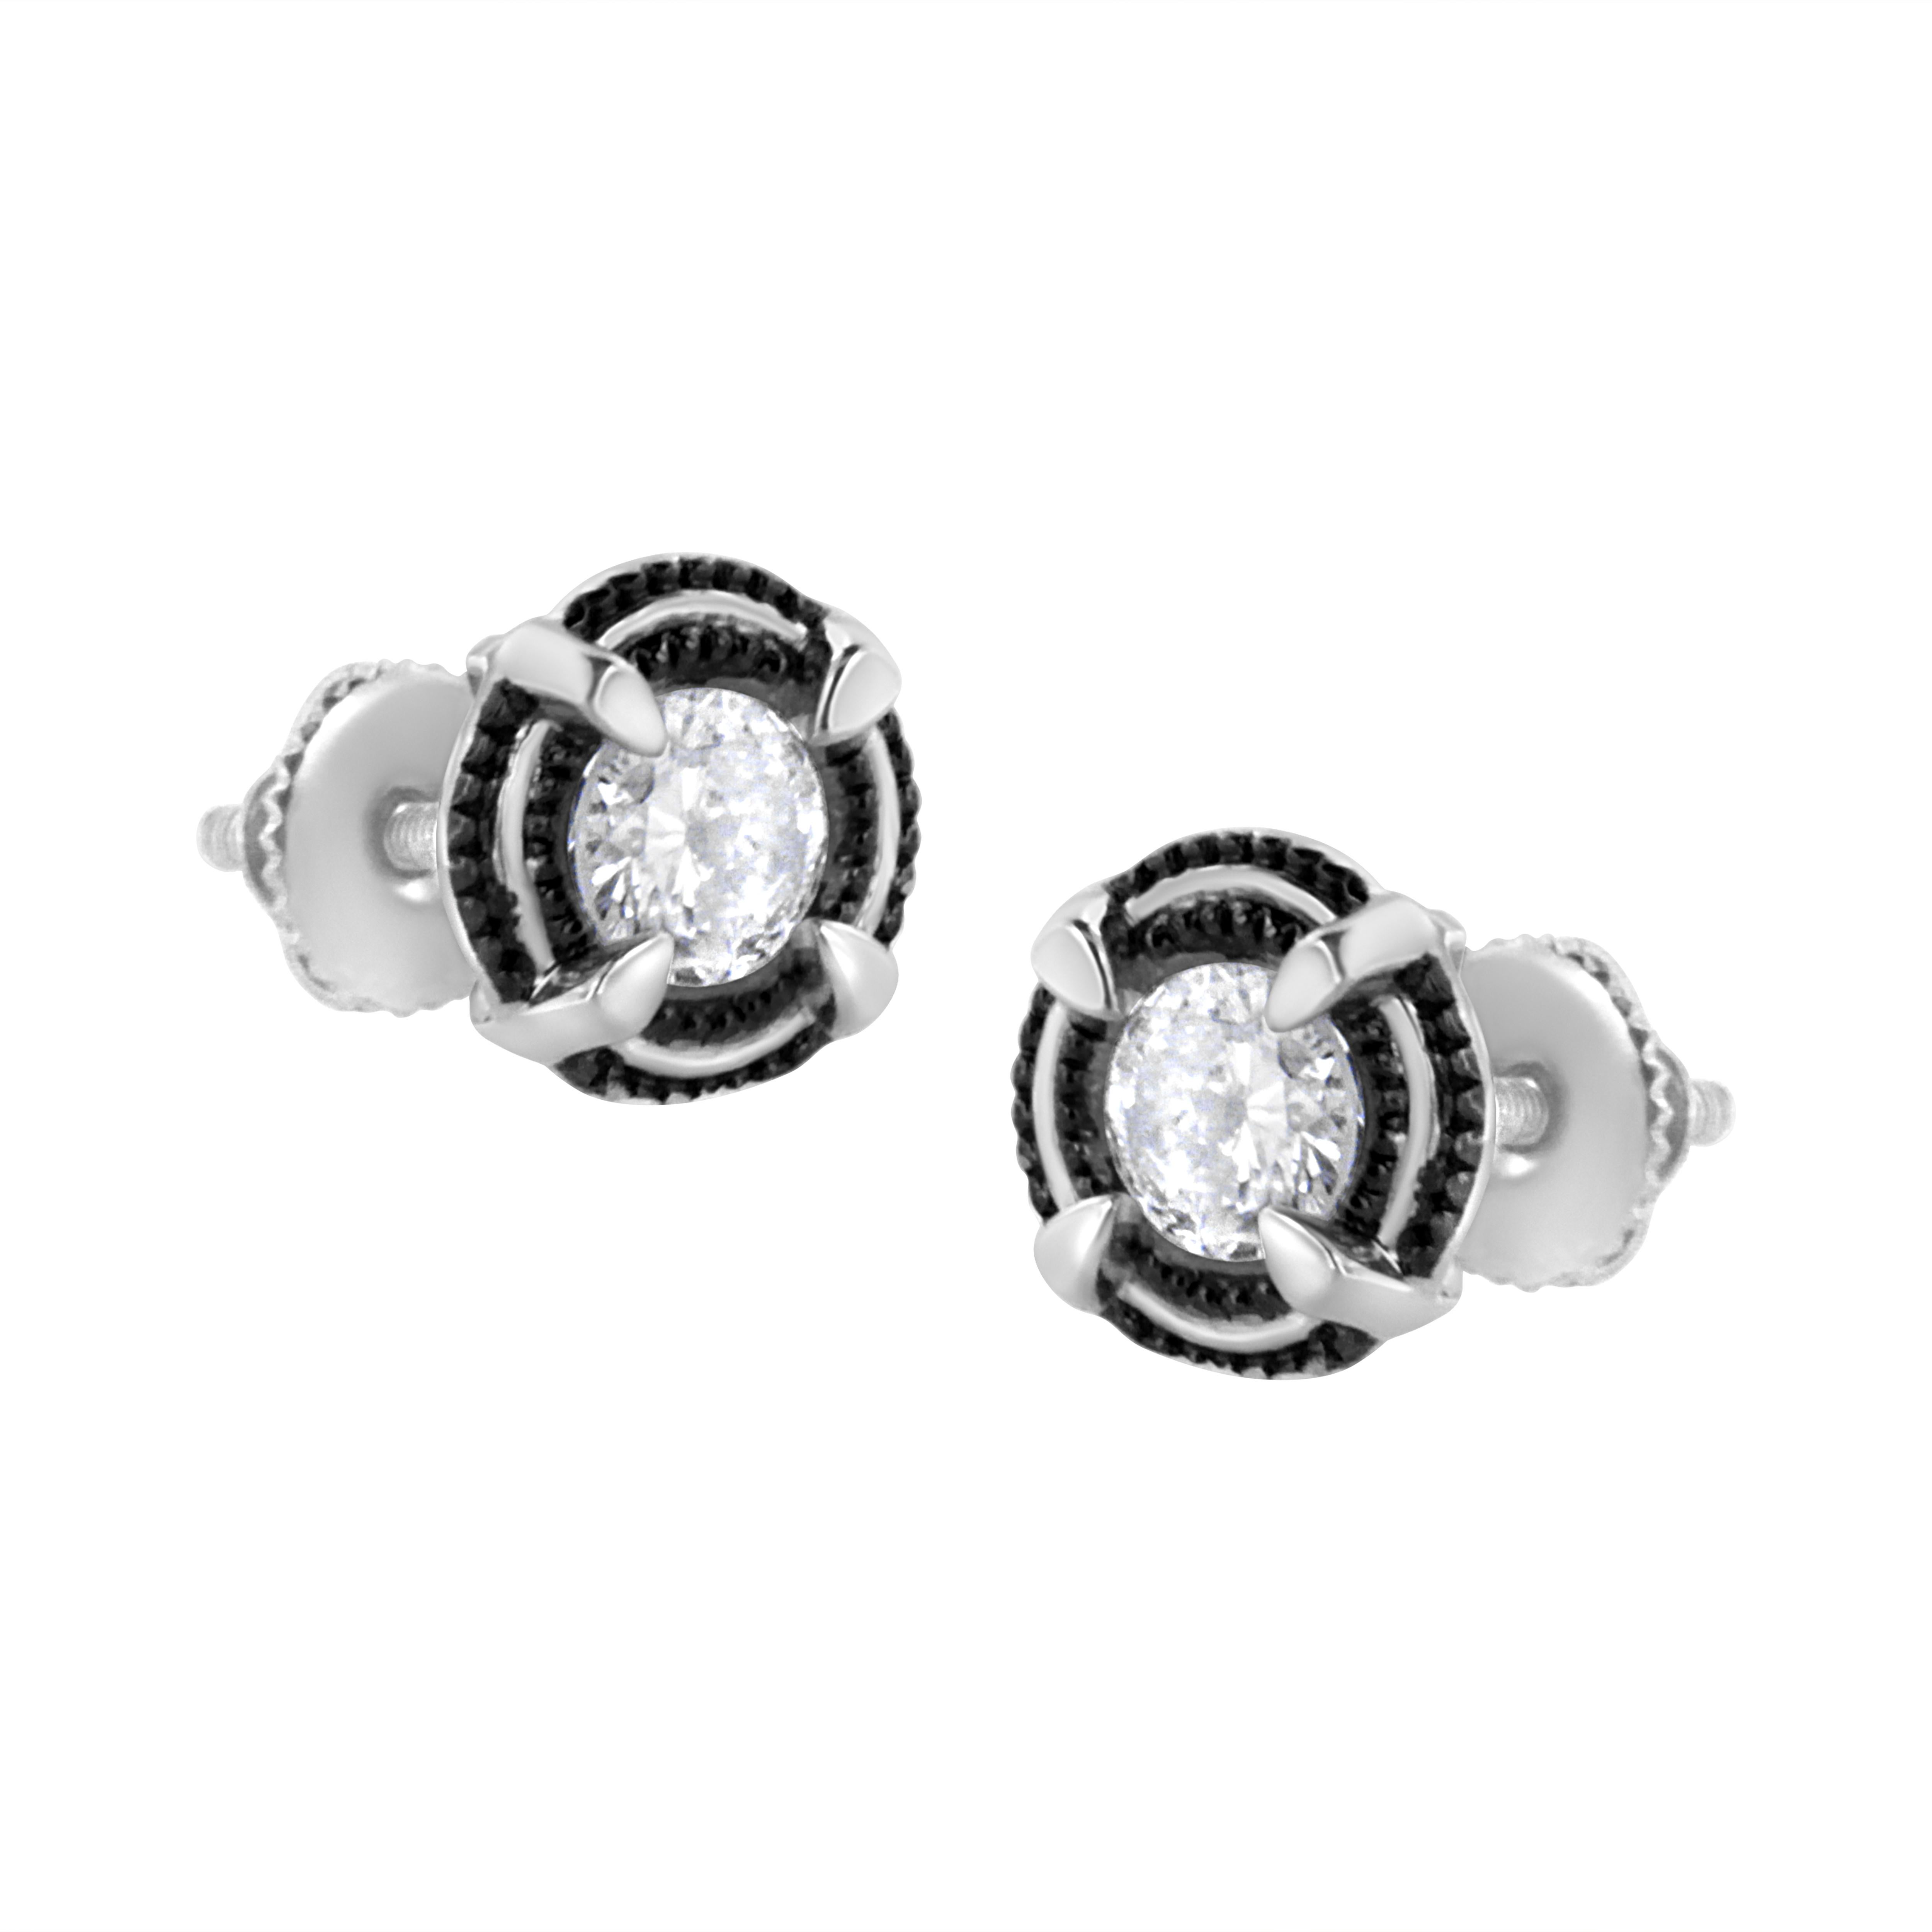 Delicate milgrain texture traces the edge of these stunning earrings crafted of genuine .925 sterling silver. Diamonds are set at the center of the 4-prong design of each of these round stud earrings, for 1.0 carat of diamonds in all. A screw back